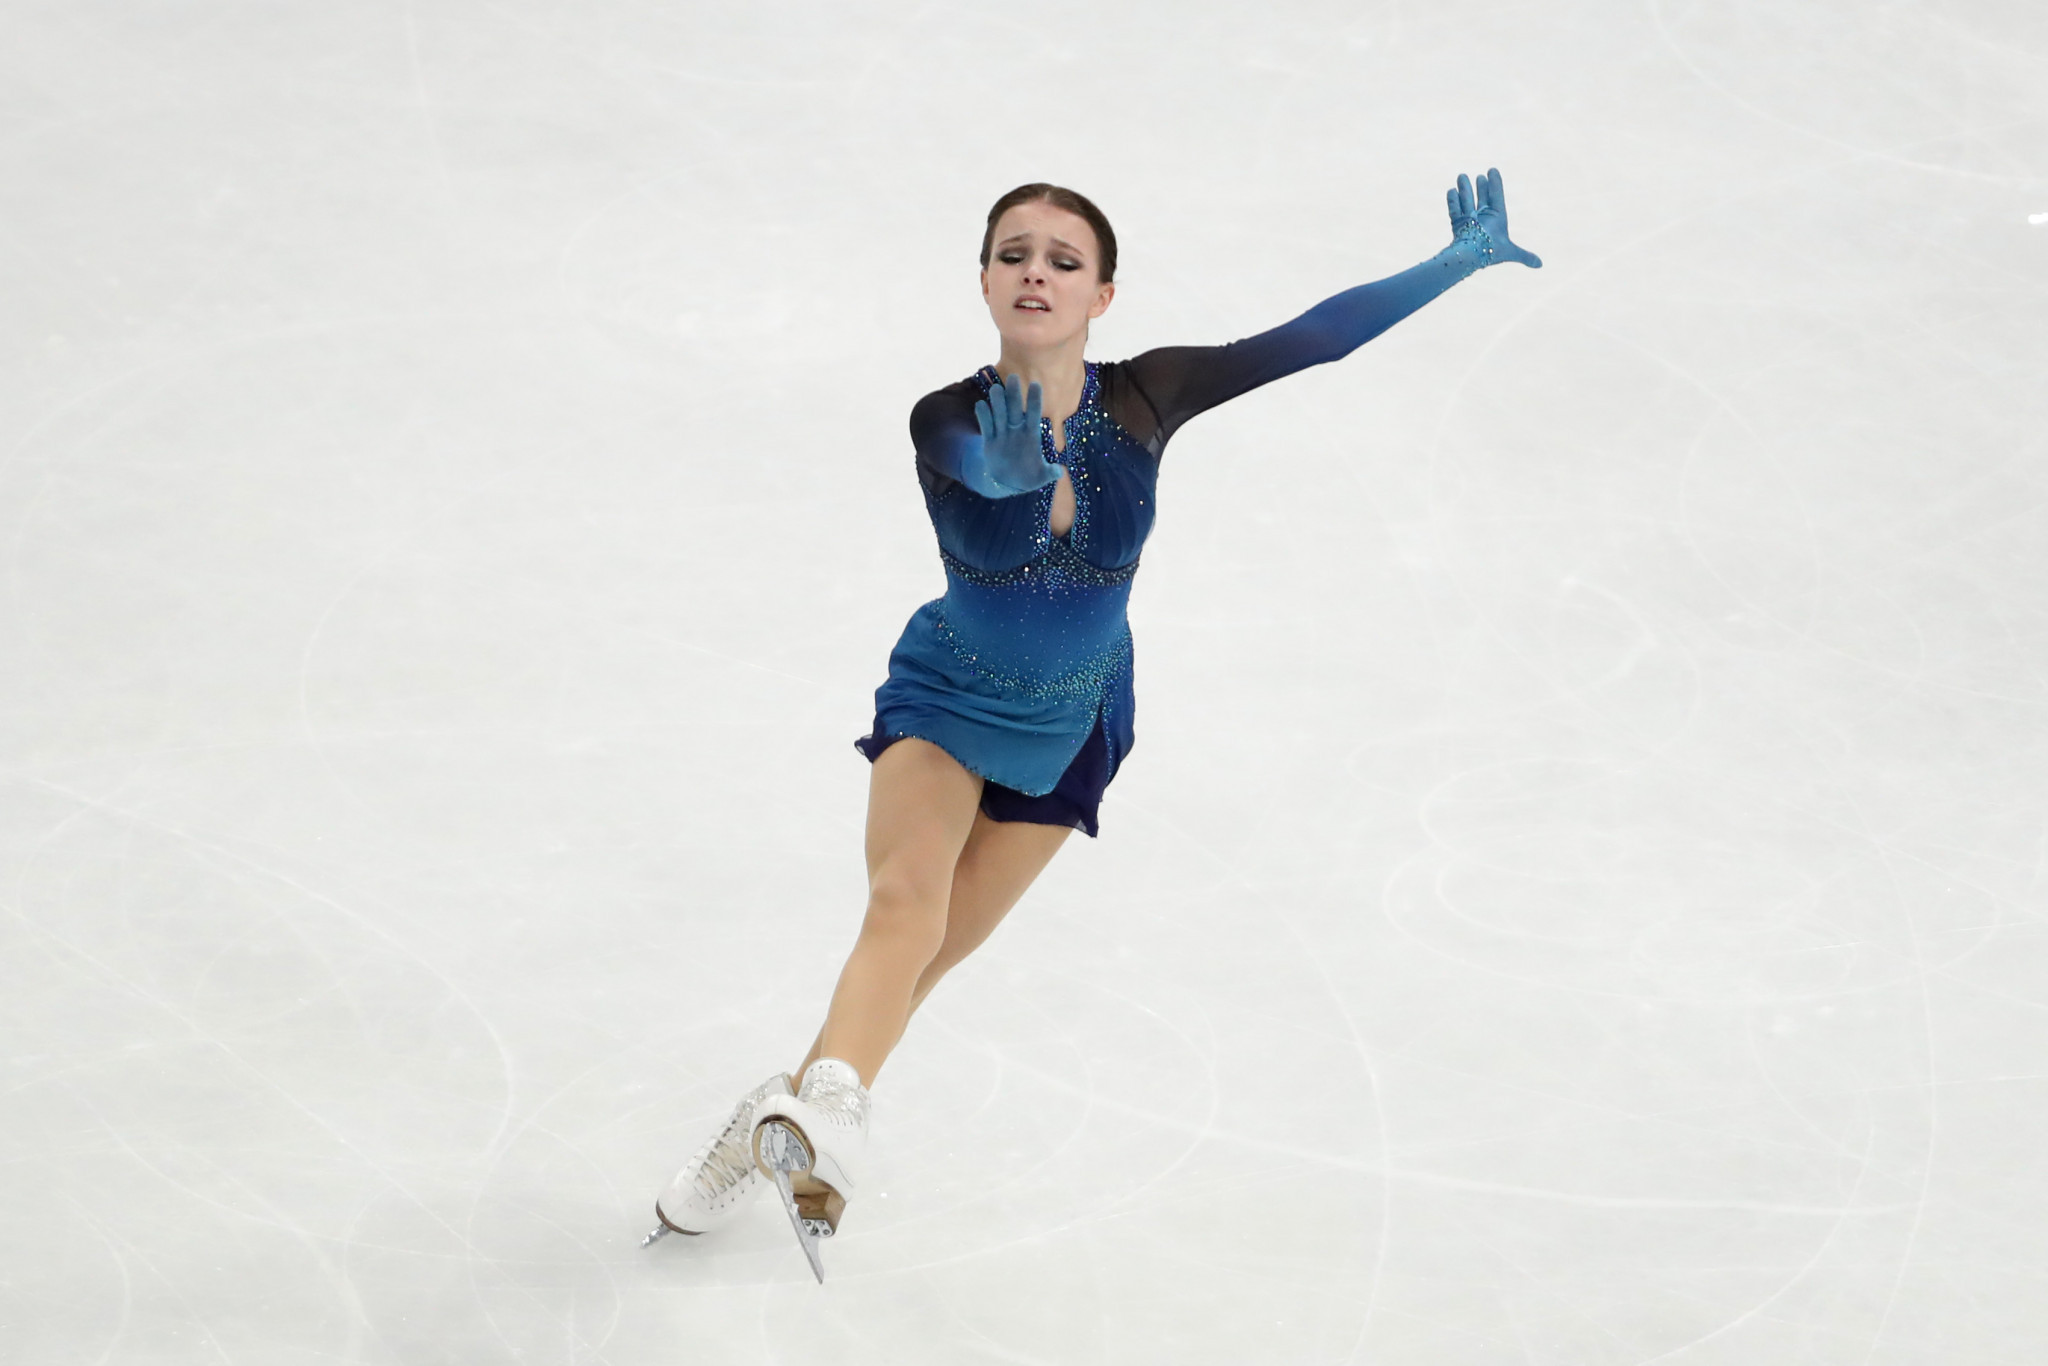 Russia's Anna Shcherbakova scored 229.69 to win the women's event at the Internationaux de France ©Getty Images